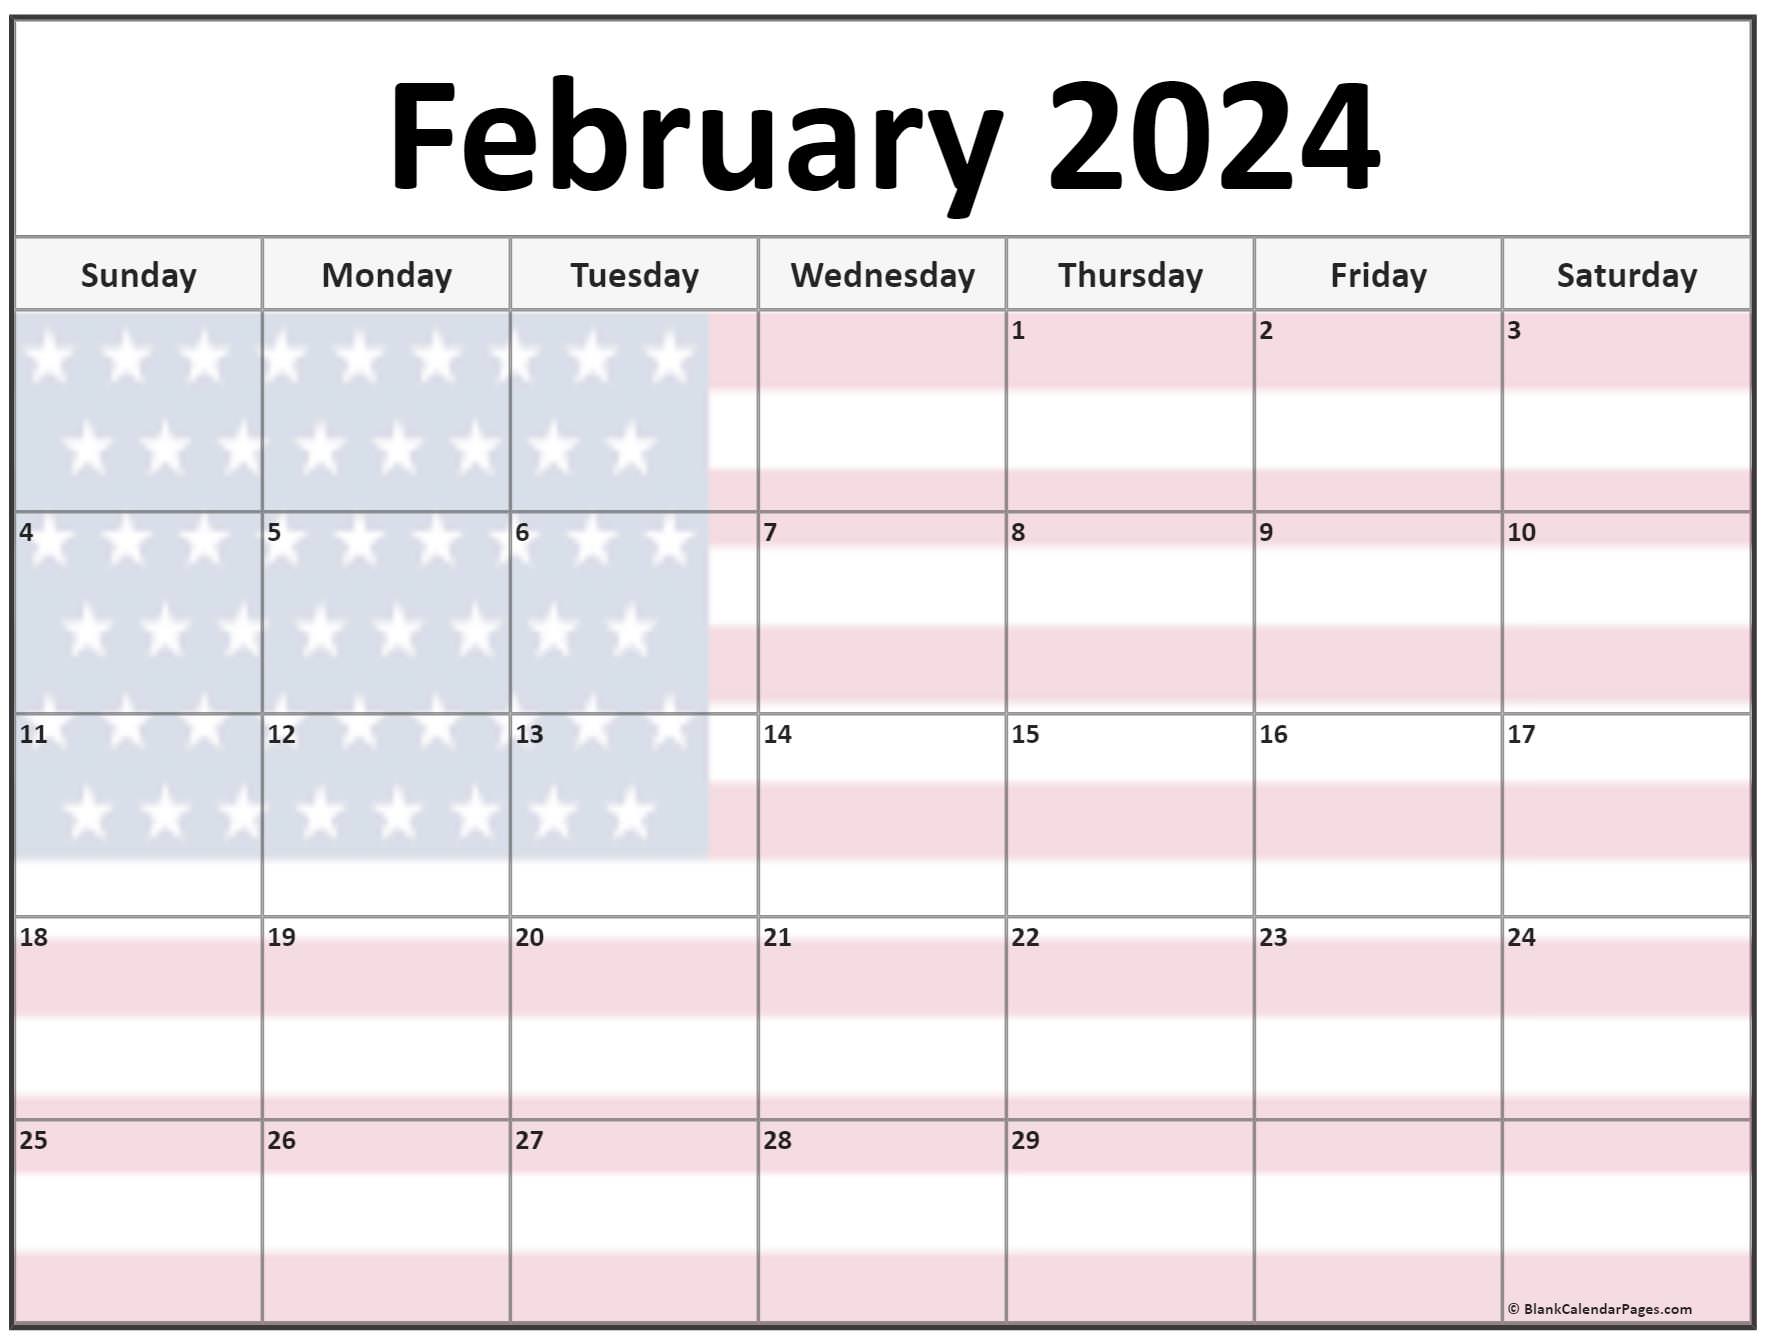 Collection of February 2023 photo calendars with image filters.